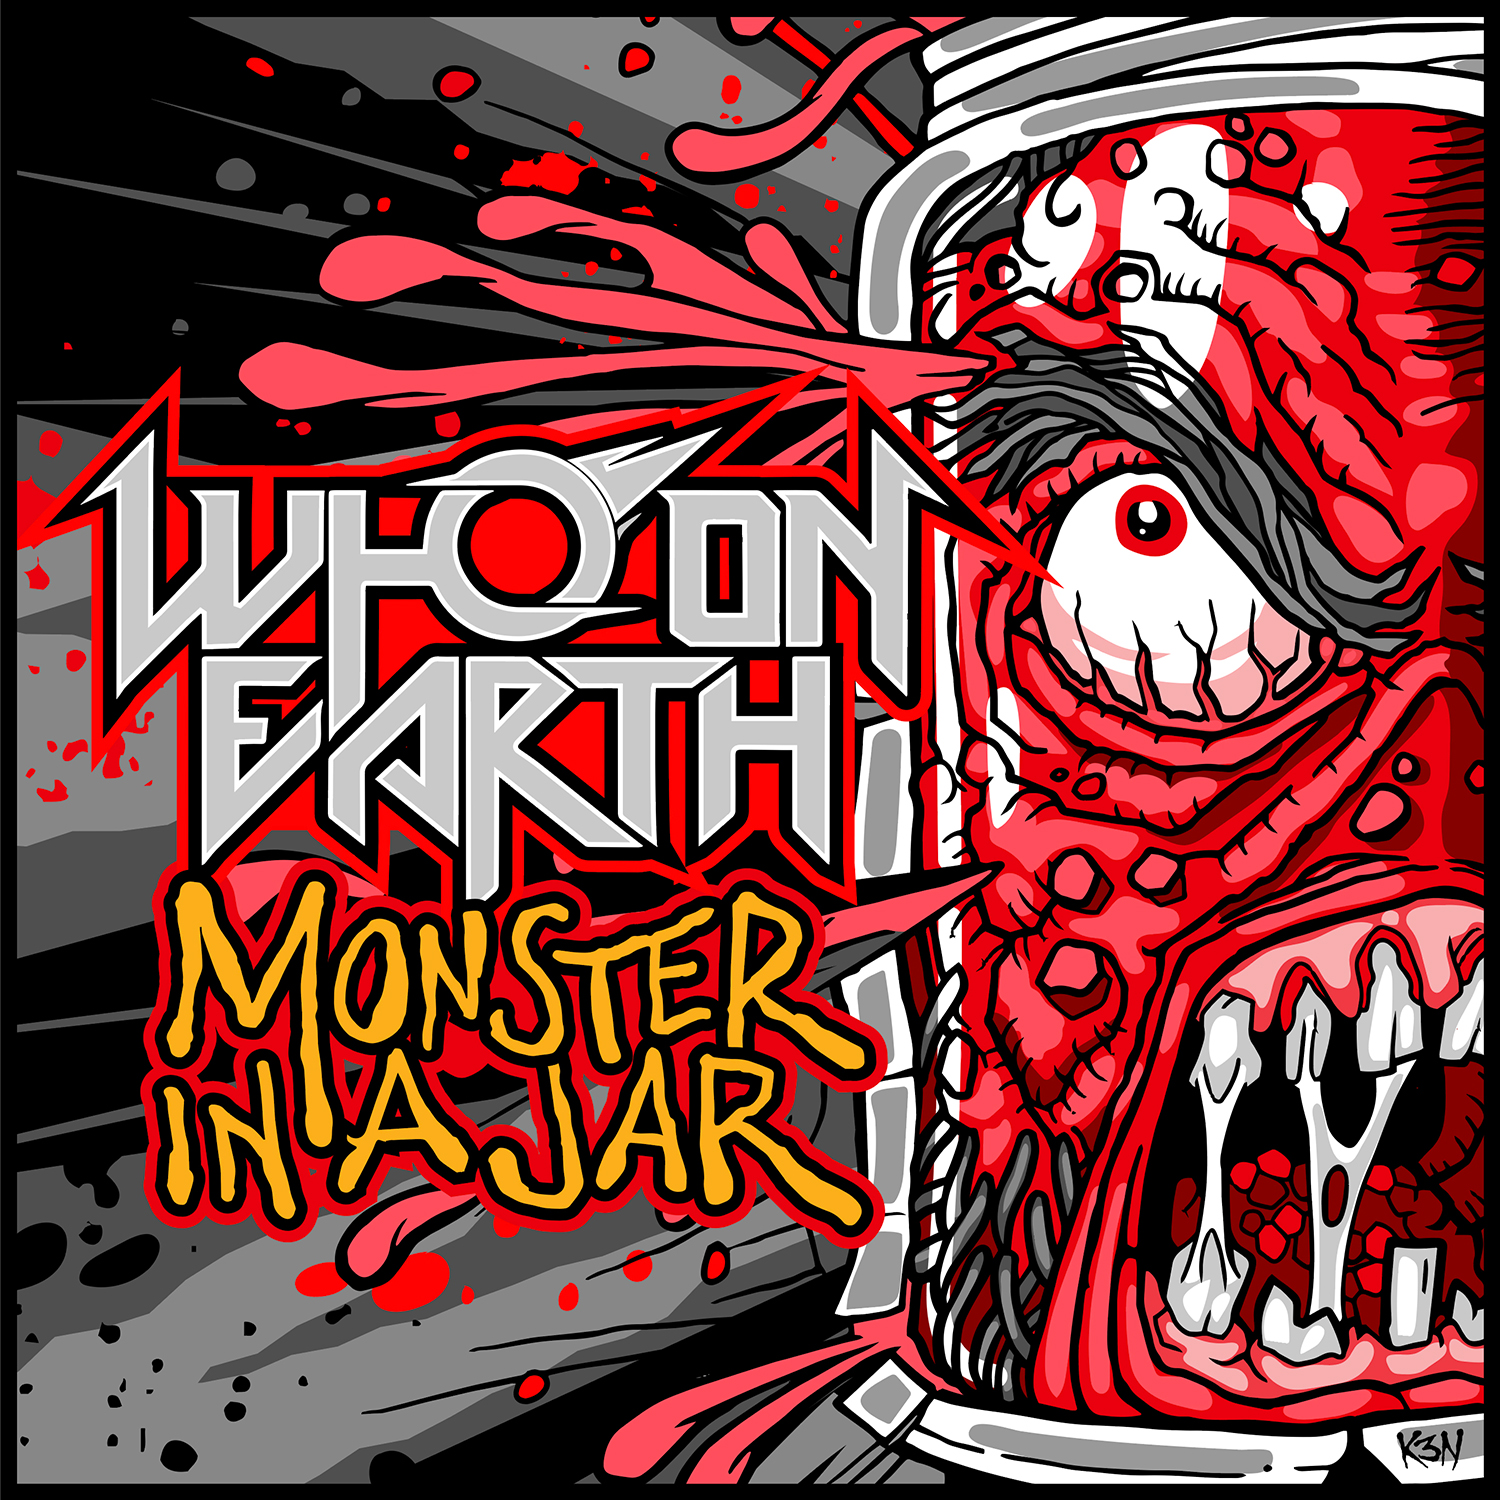 Who On Earth – Monster in a Jar